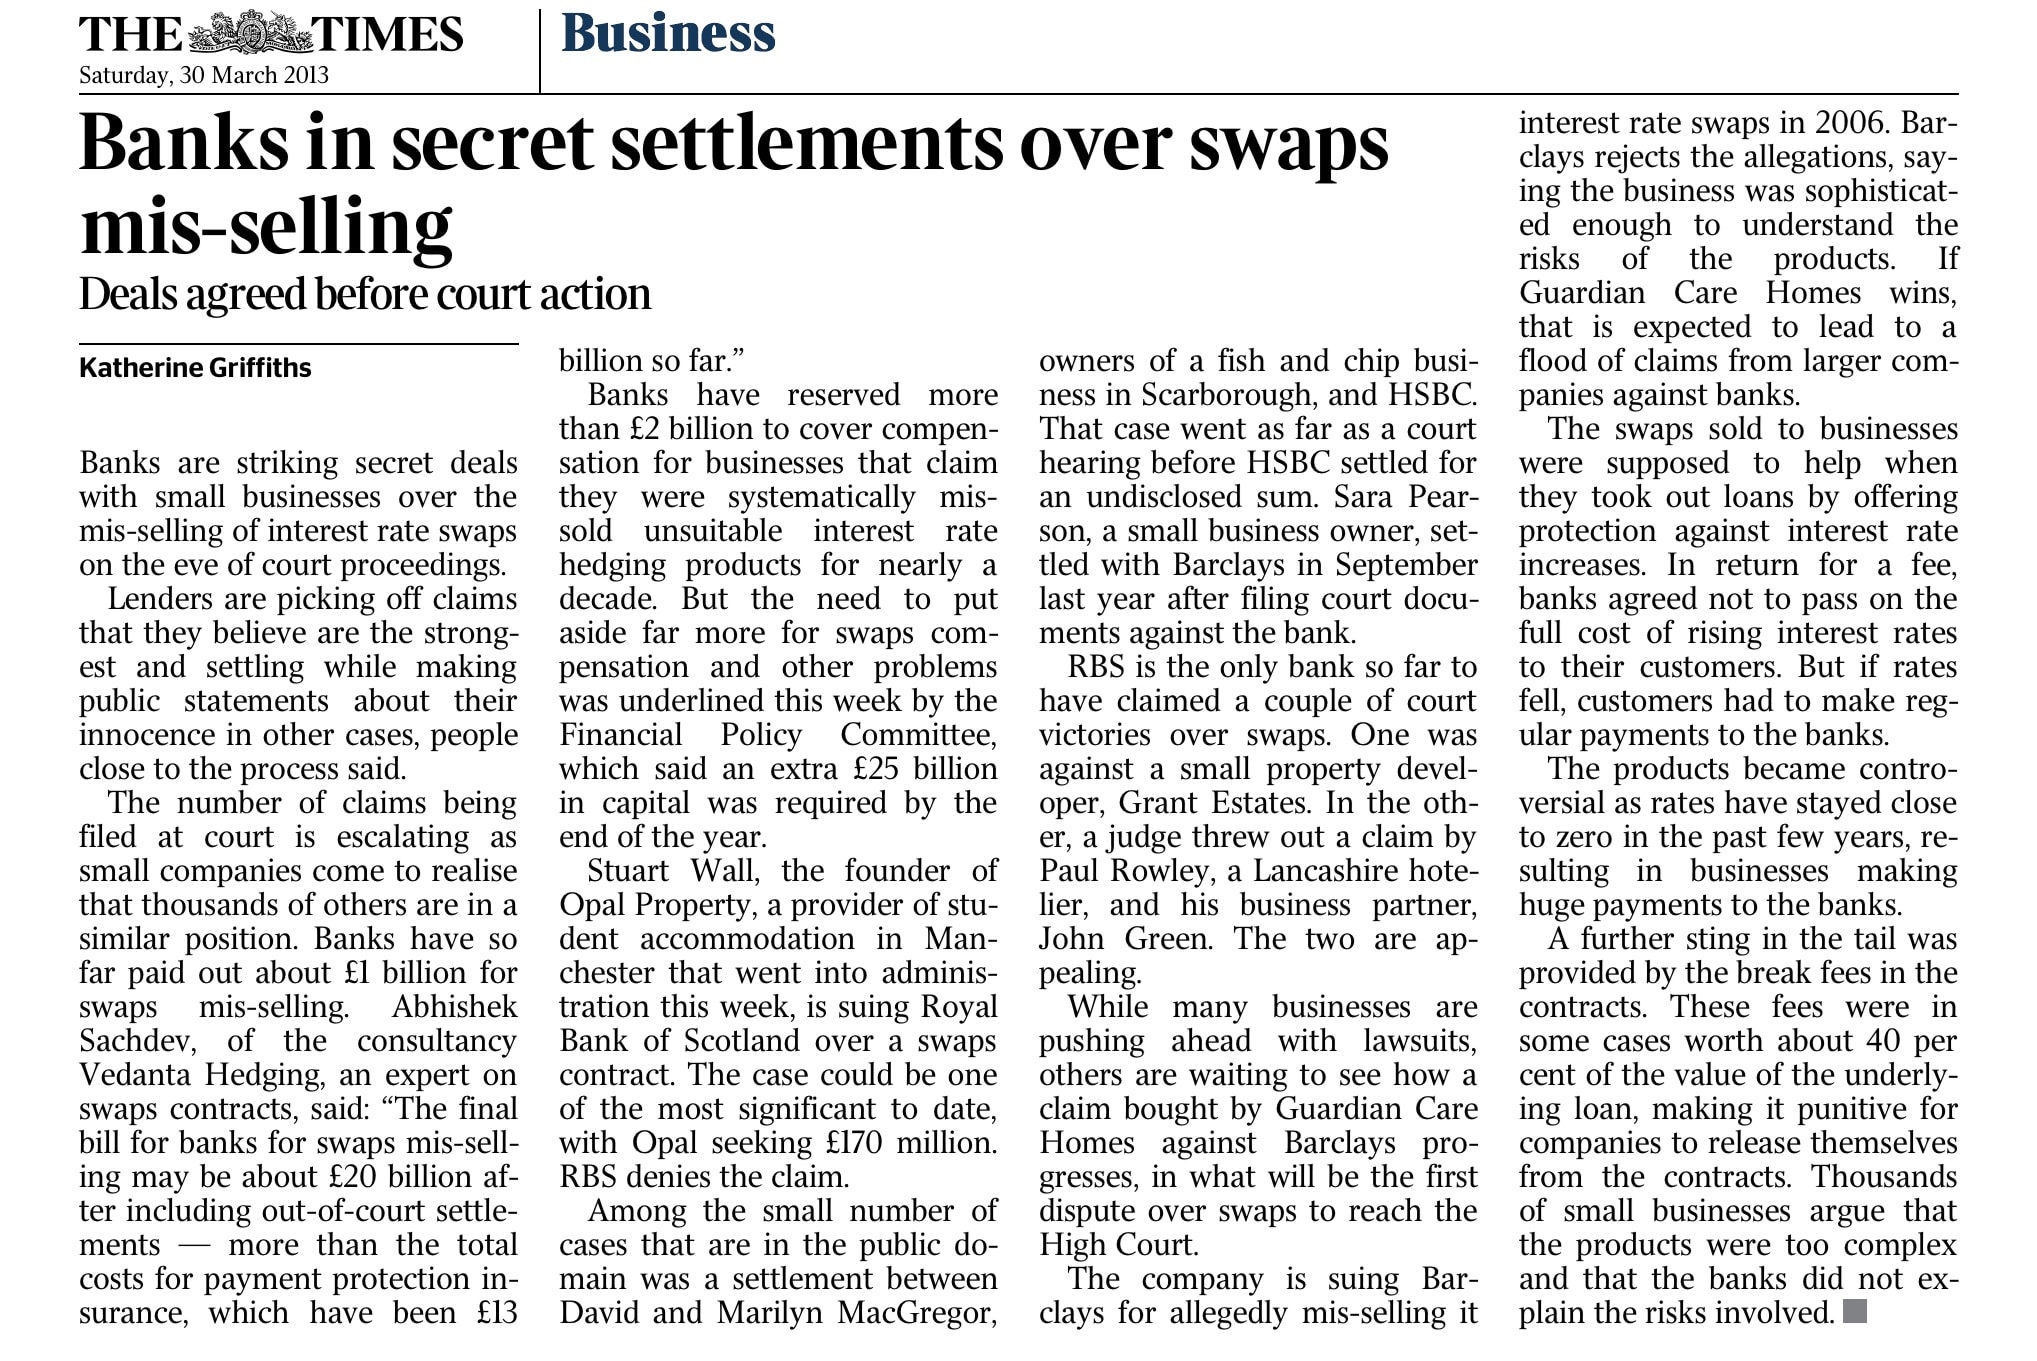 Banks in secret settlements over swaps mis-selling - settling good cases - LEXLAW Solicitors & Barristers, London.